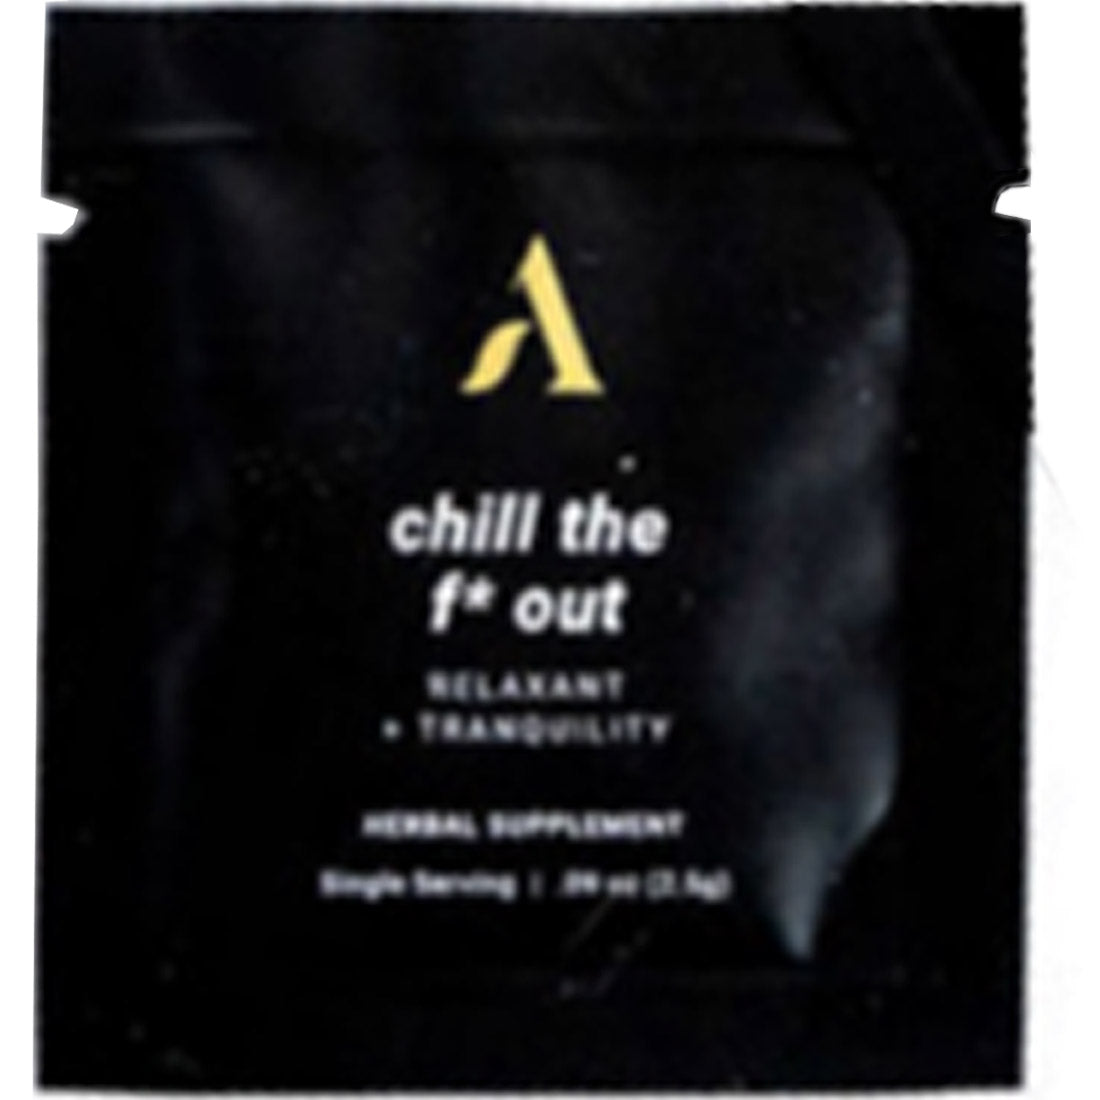 Apothekary Chill The F* Out (Mushroom Blend with Ashwagandha)